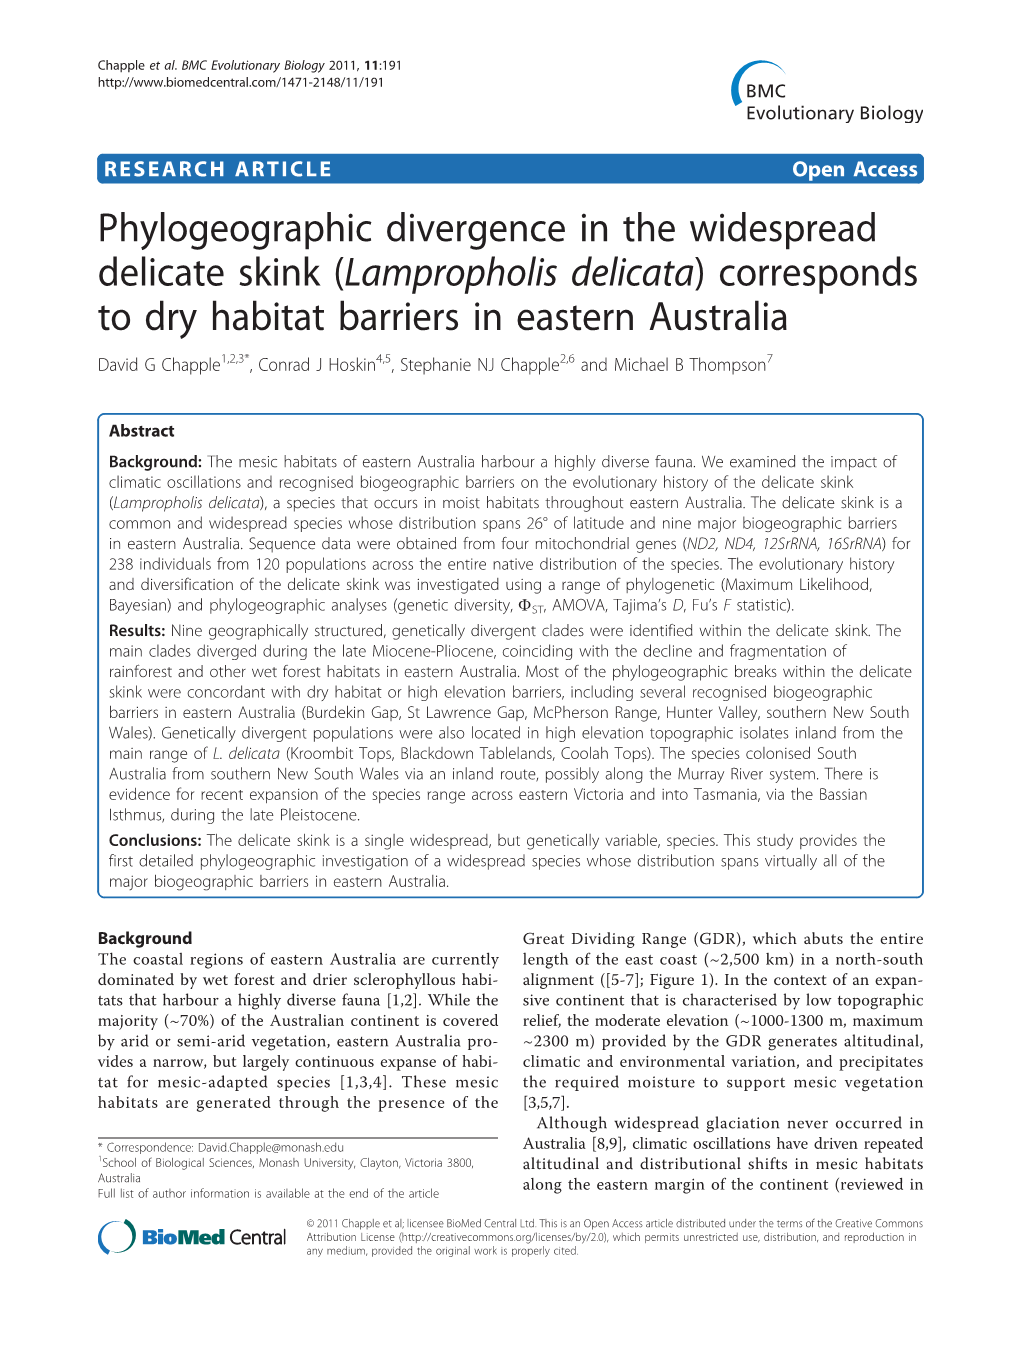 Phylogeographic Divergence in the Widespread Delicate Skink (Lampropholis Delicata) Corresponds to Dry Habitat Barriers in Easte